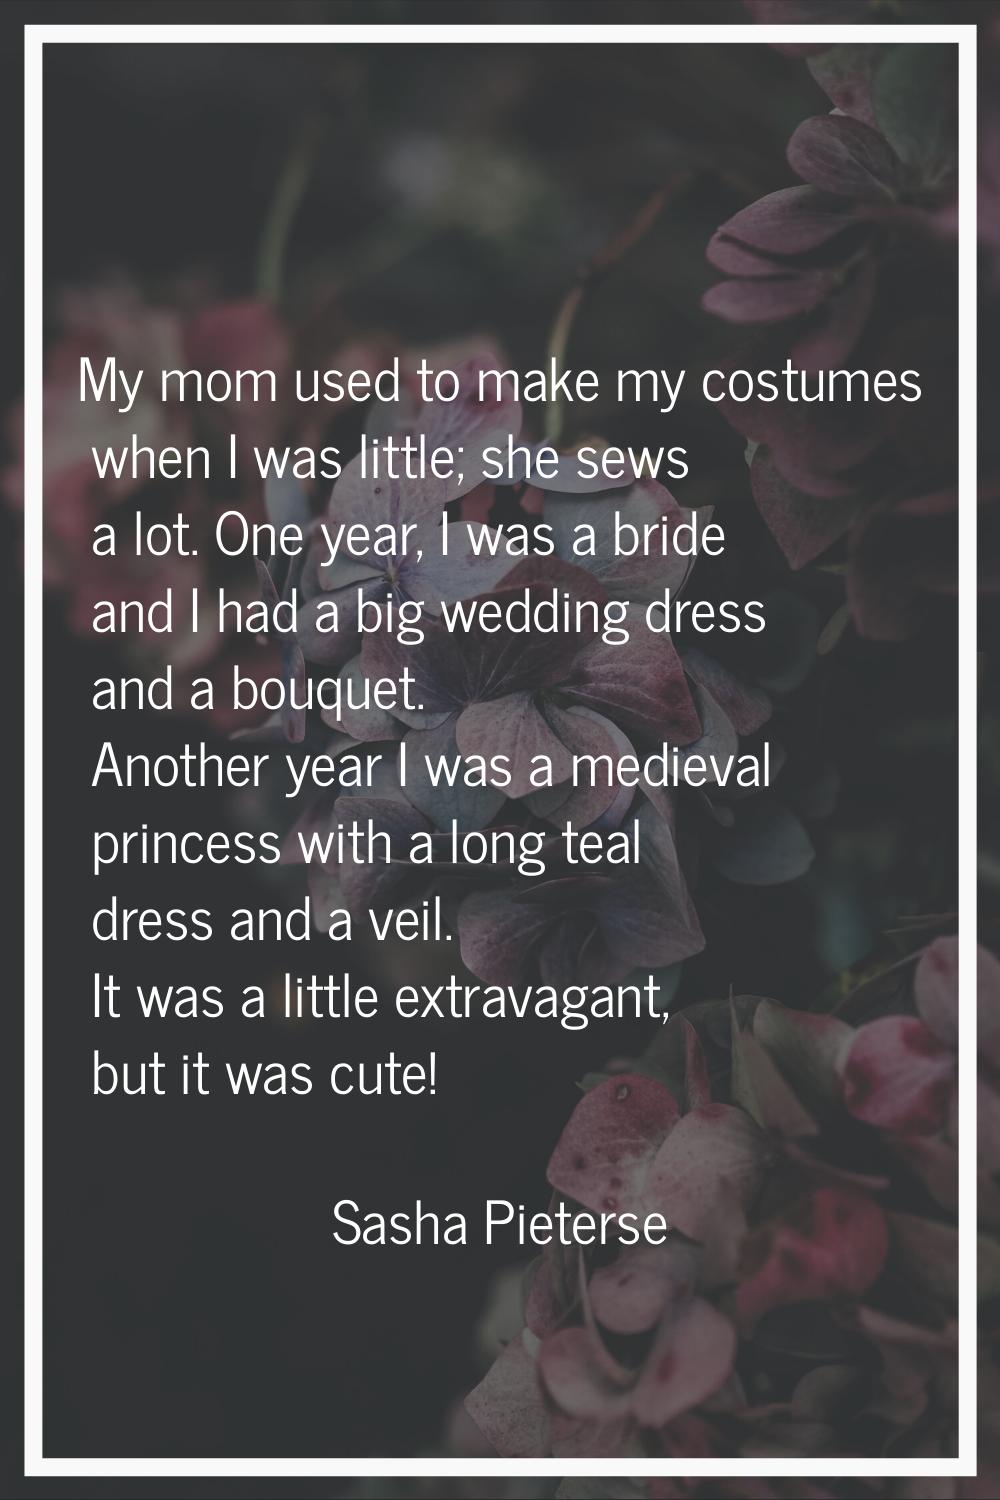 My mom used to make my costumes when I was little; she sews a lot. One year, I was a bride and I ha